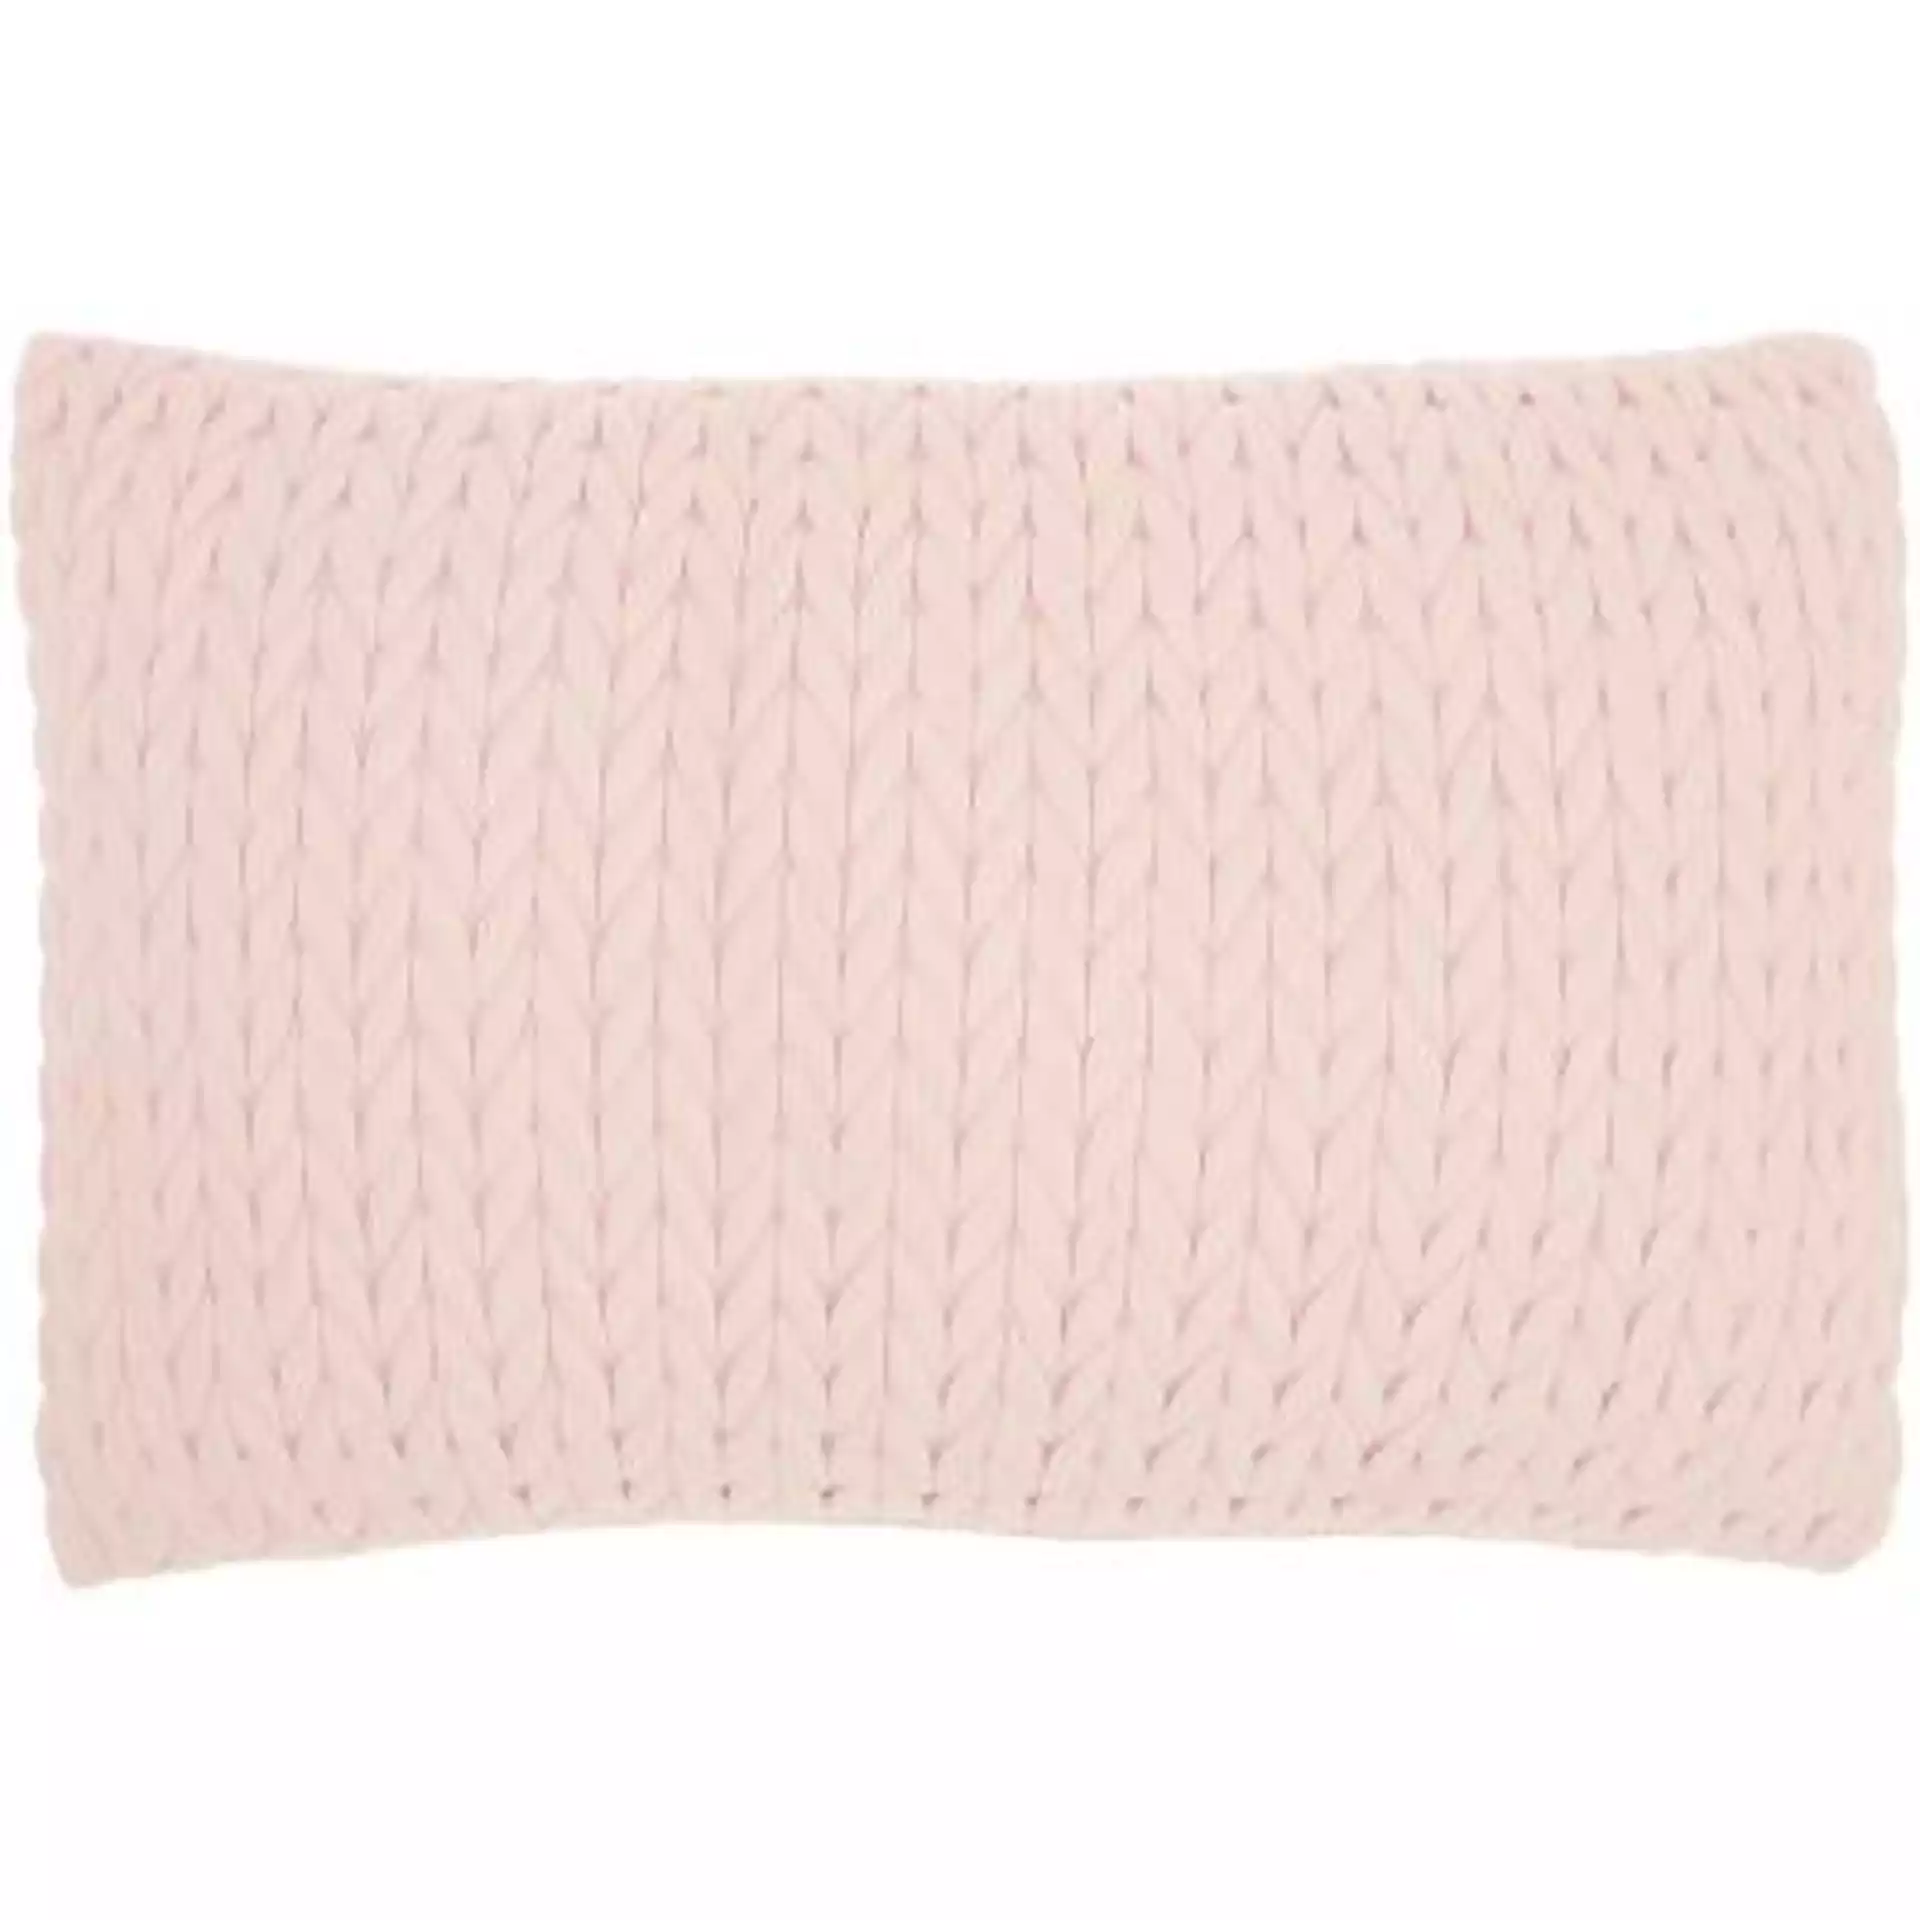 Mina Victory Life Styles Blush 14 in. x20 in. Rectangle Quilted Chevron Polyester Suede Throw Pillow